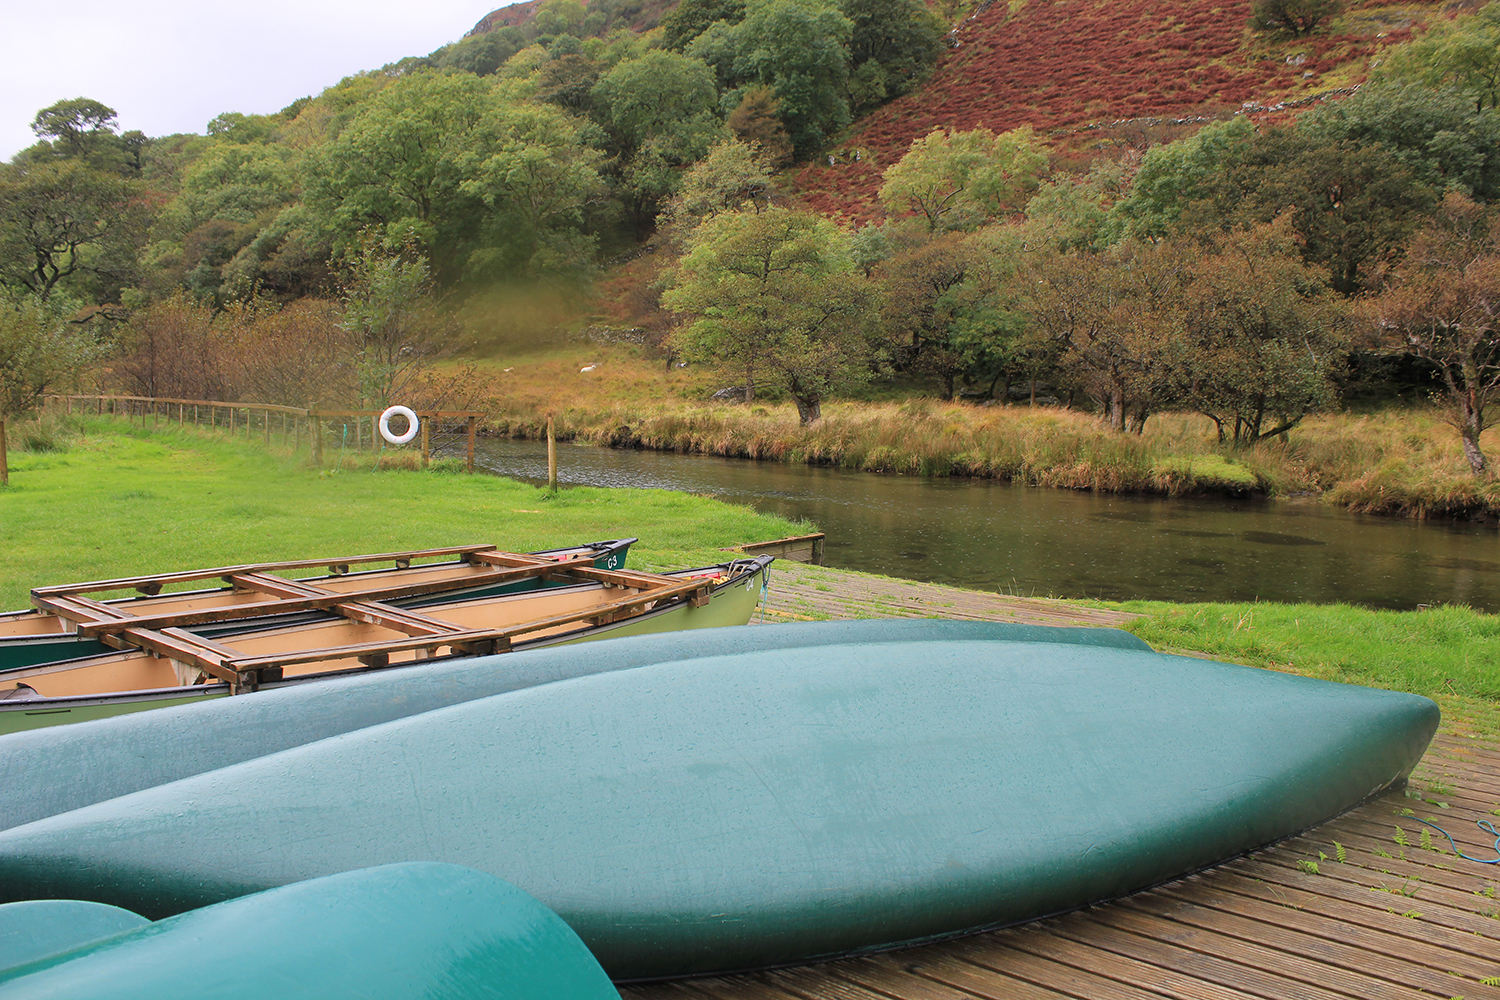 Llyn Gwynant campsite in Snowdonia, read our detailed picture review